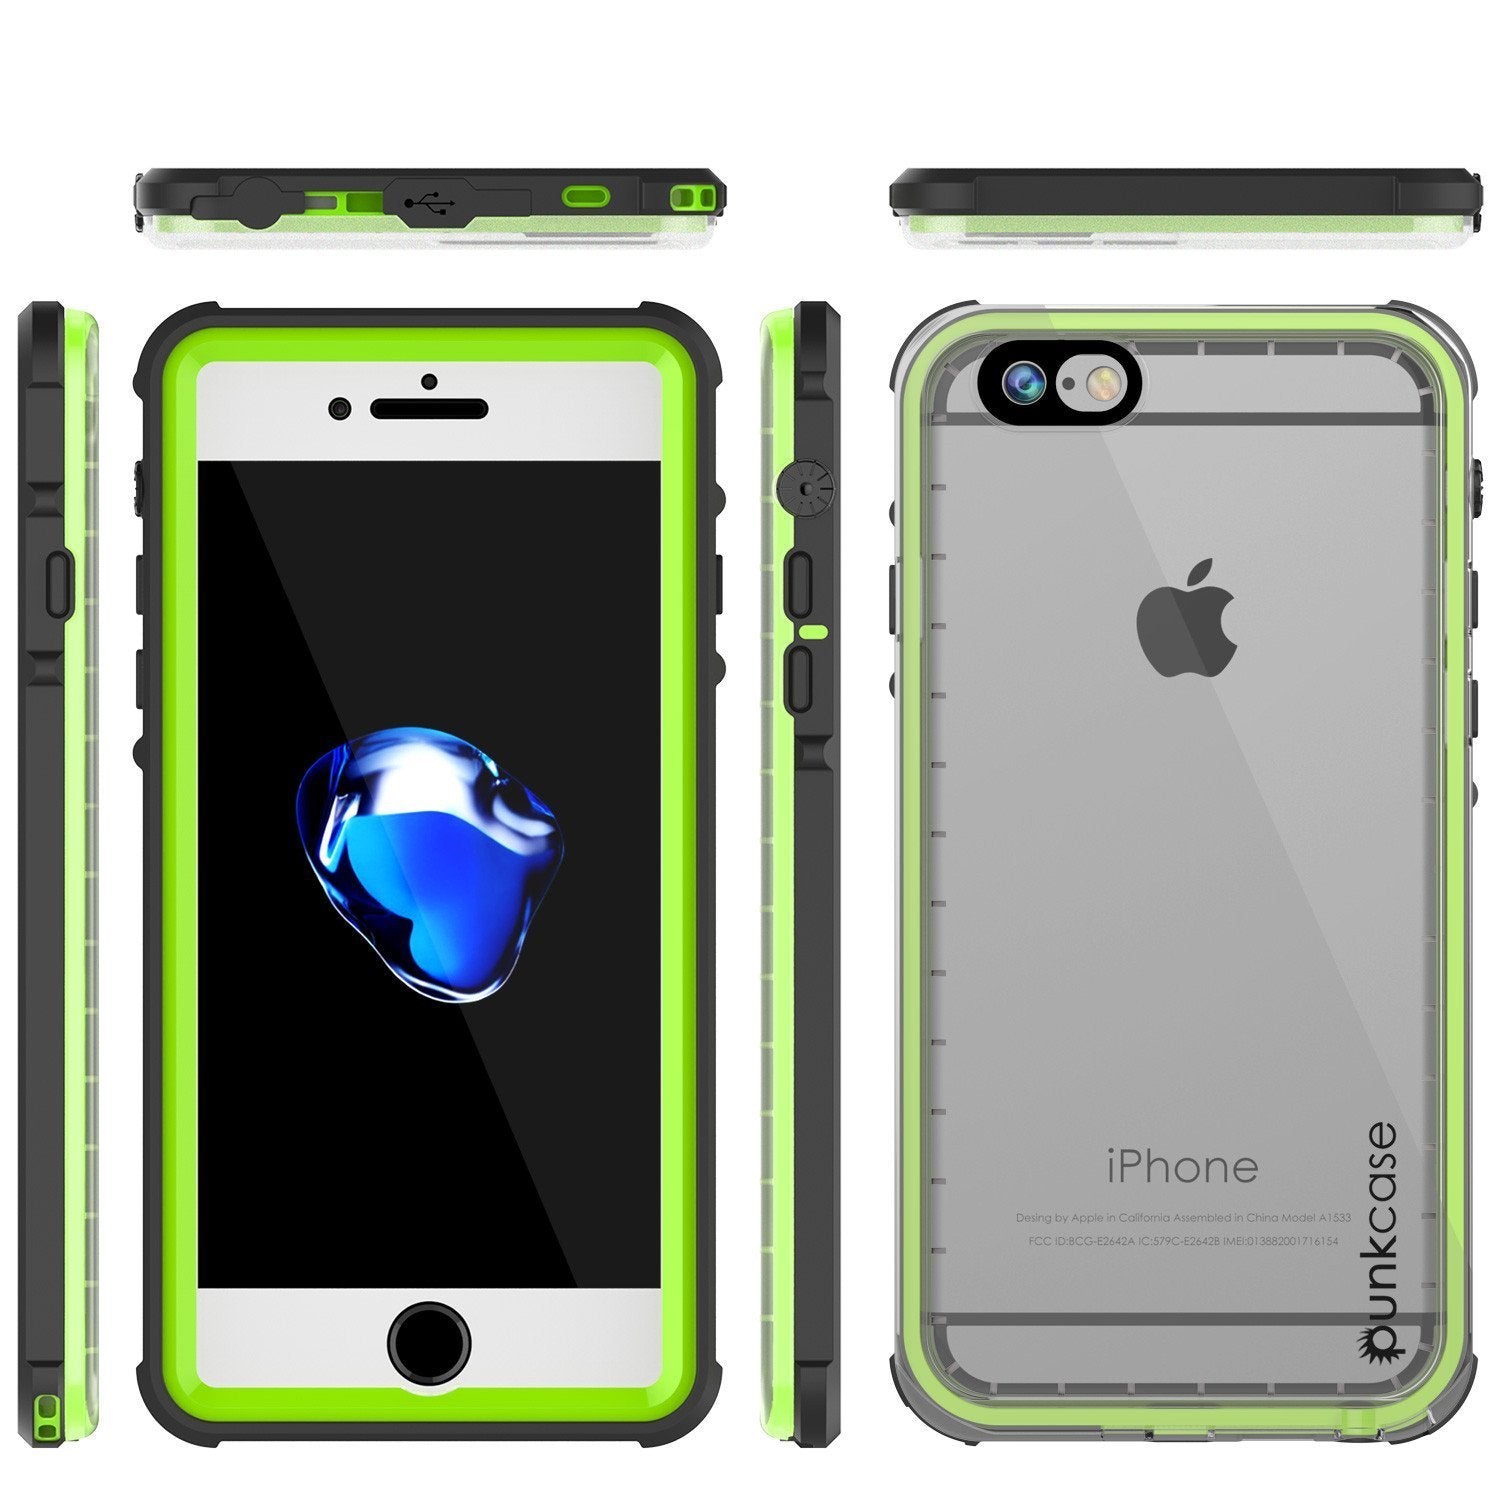 Apple iPhone SE (4.7") Waterproof Case, PUNKcase CRYSTAL Light Green  W/ Attached Screen Protector  | Warranty